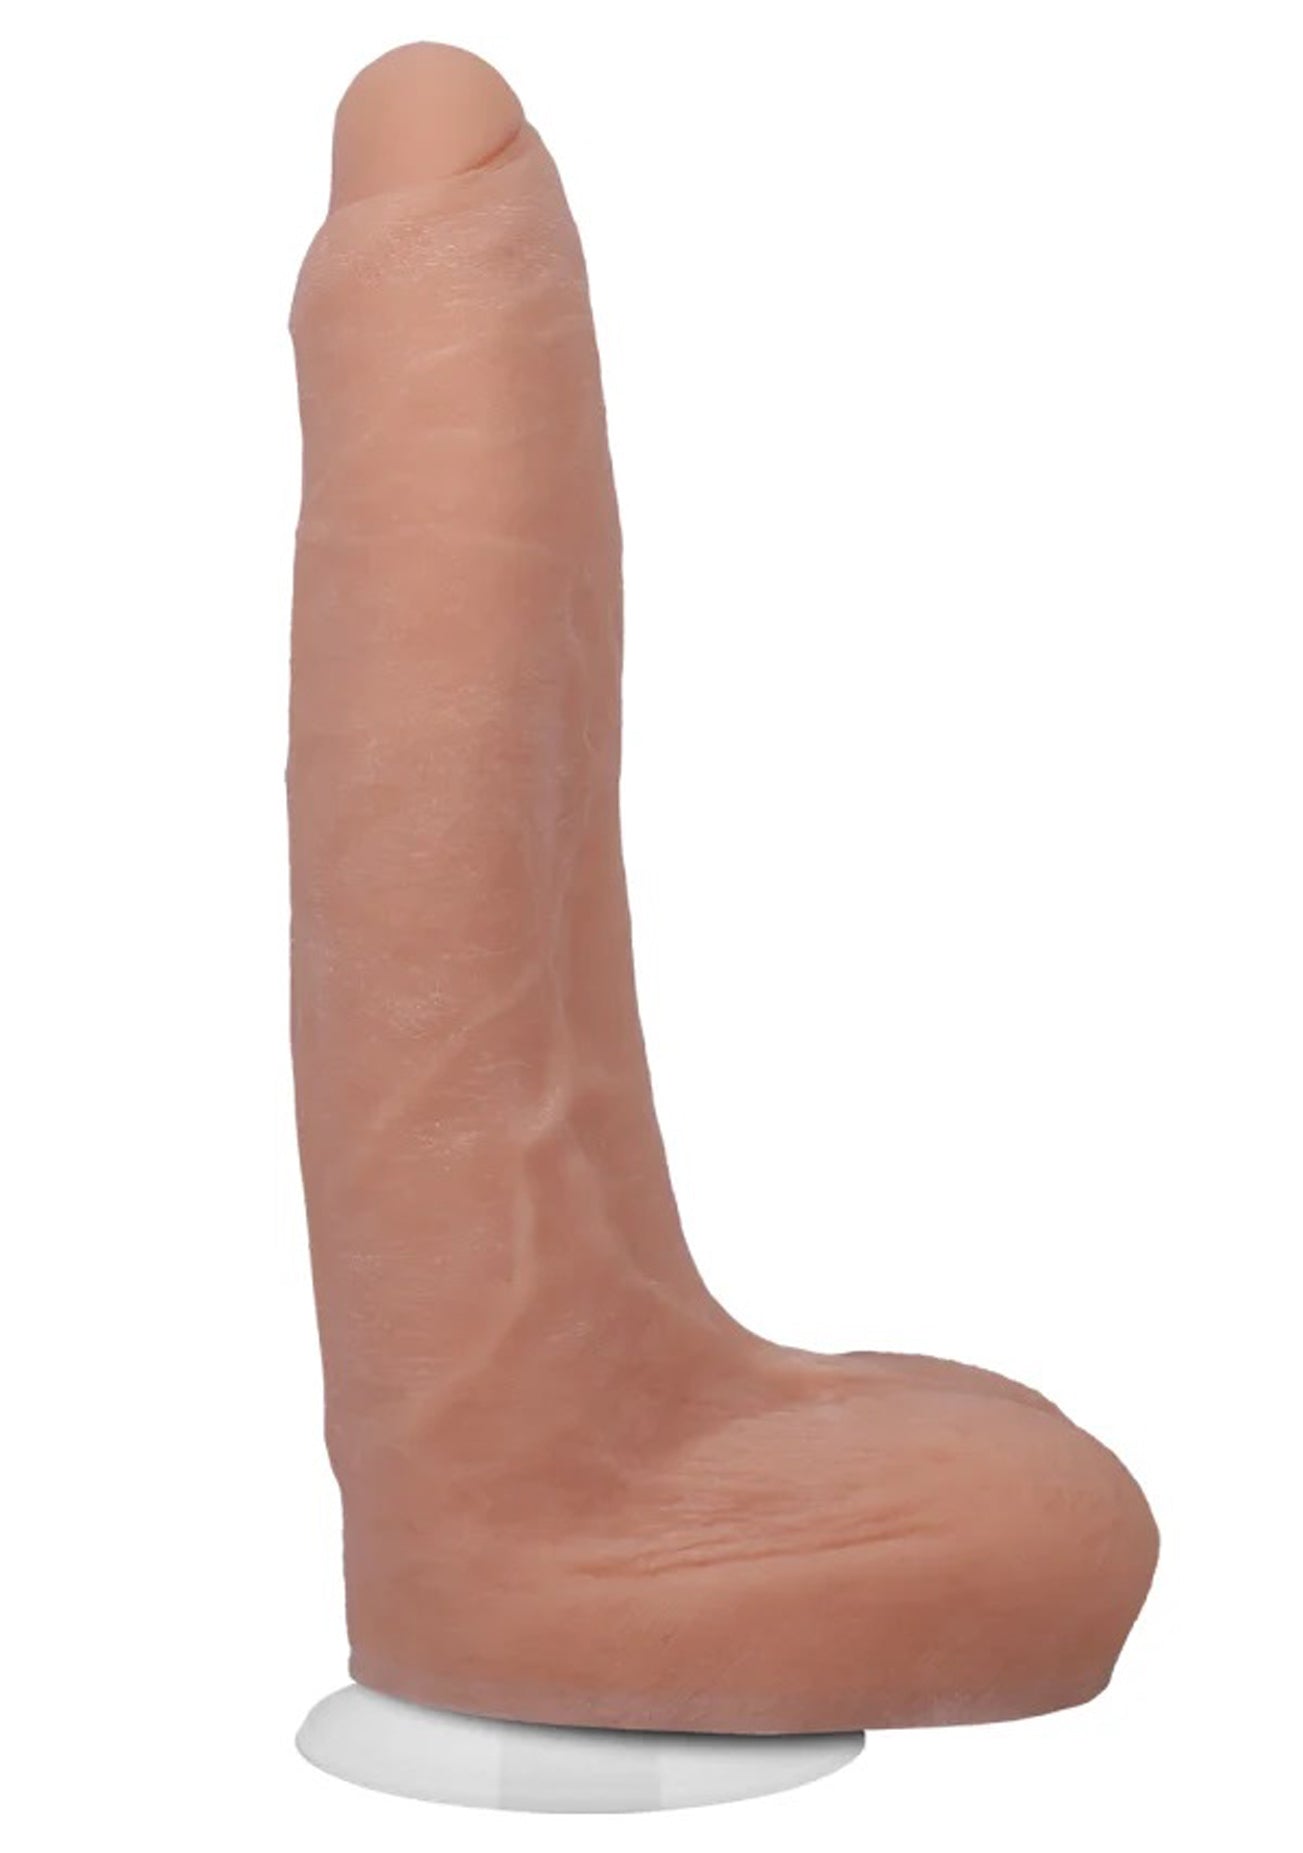 Signature Cocks - Owen Gray - 9 Inch Ultraskyn  Cock With Removable Vac-U-Lock Suction Cup - Skin Tone-3